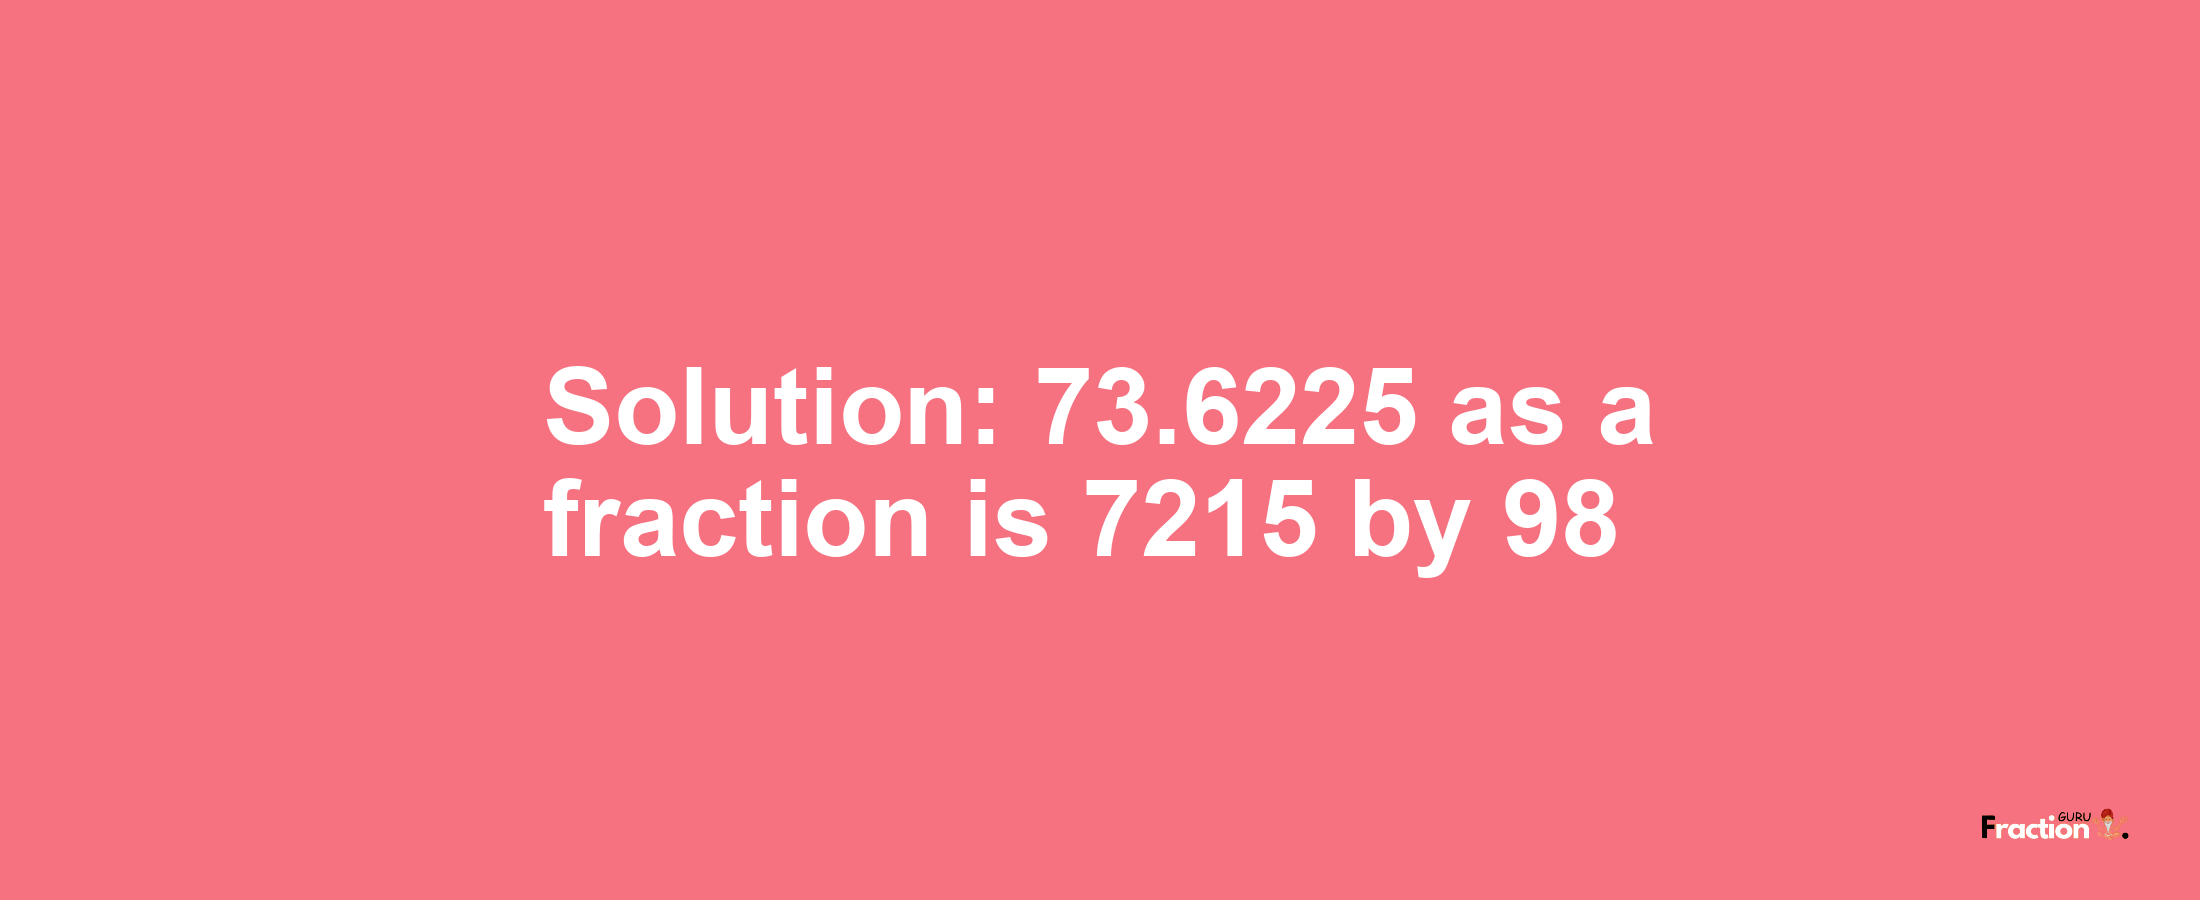 Solution:73.6225 as a fraction is 7215/98